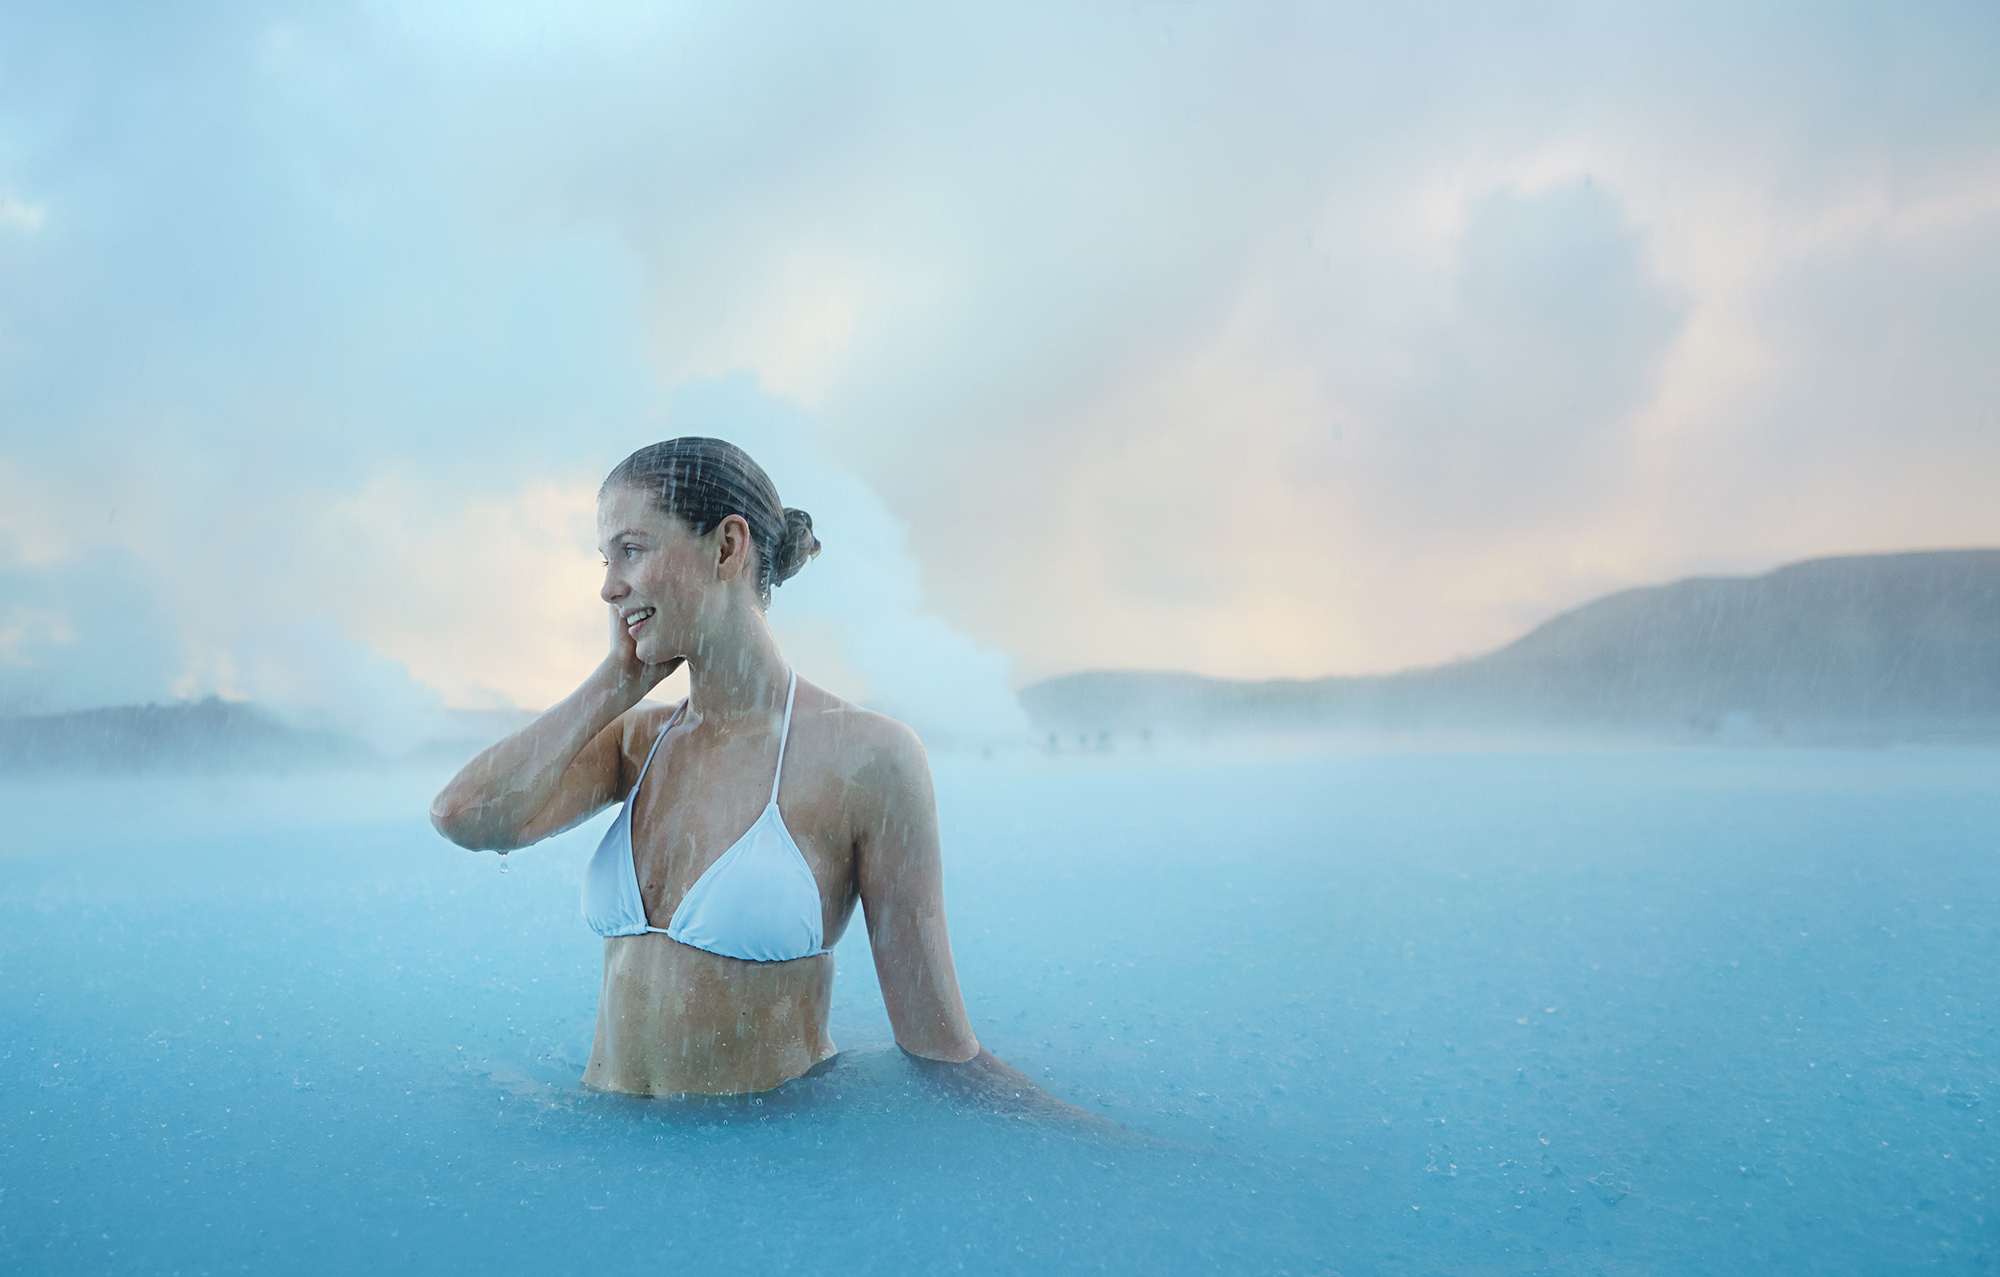 Upon arrival, the Blue Lagoon Spa is a wonderful place to introduce yourself to the wonders of Iceland's geothermal activity.